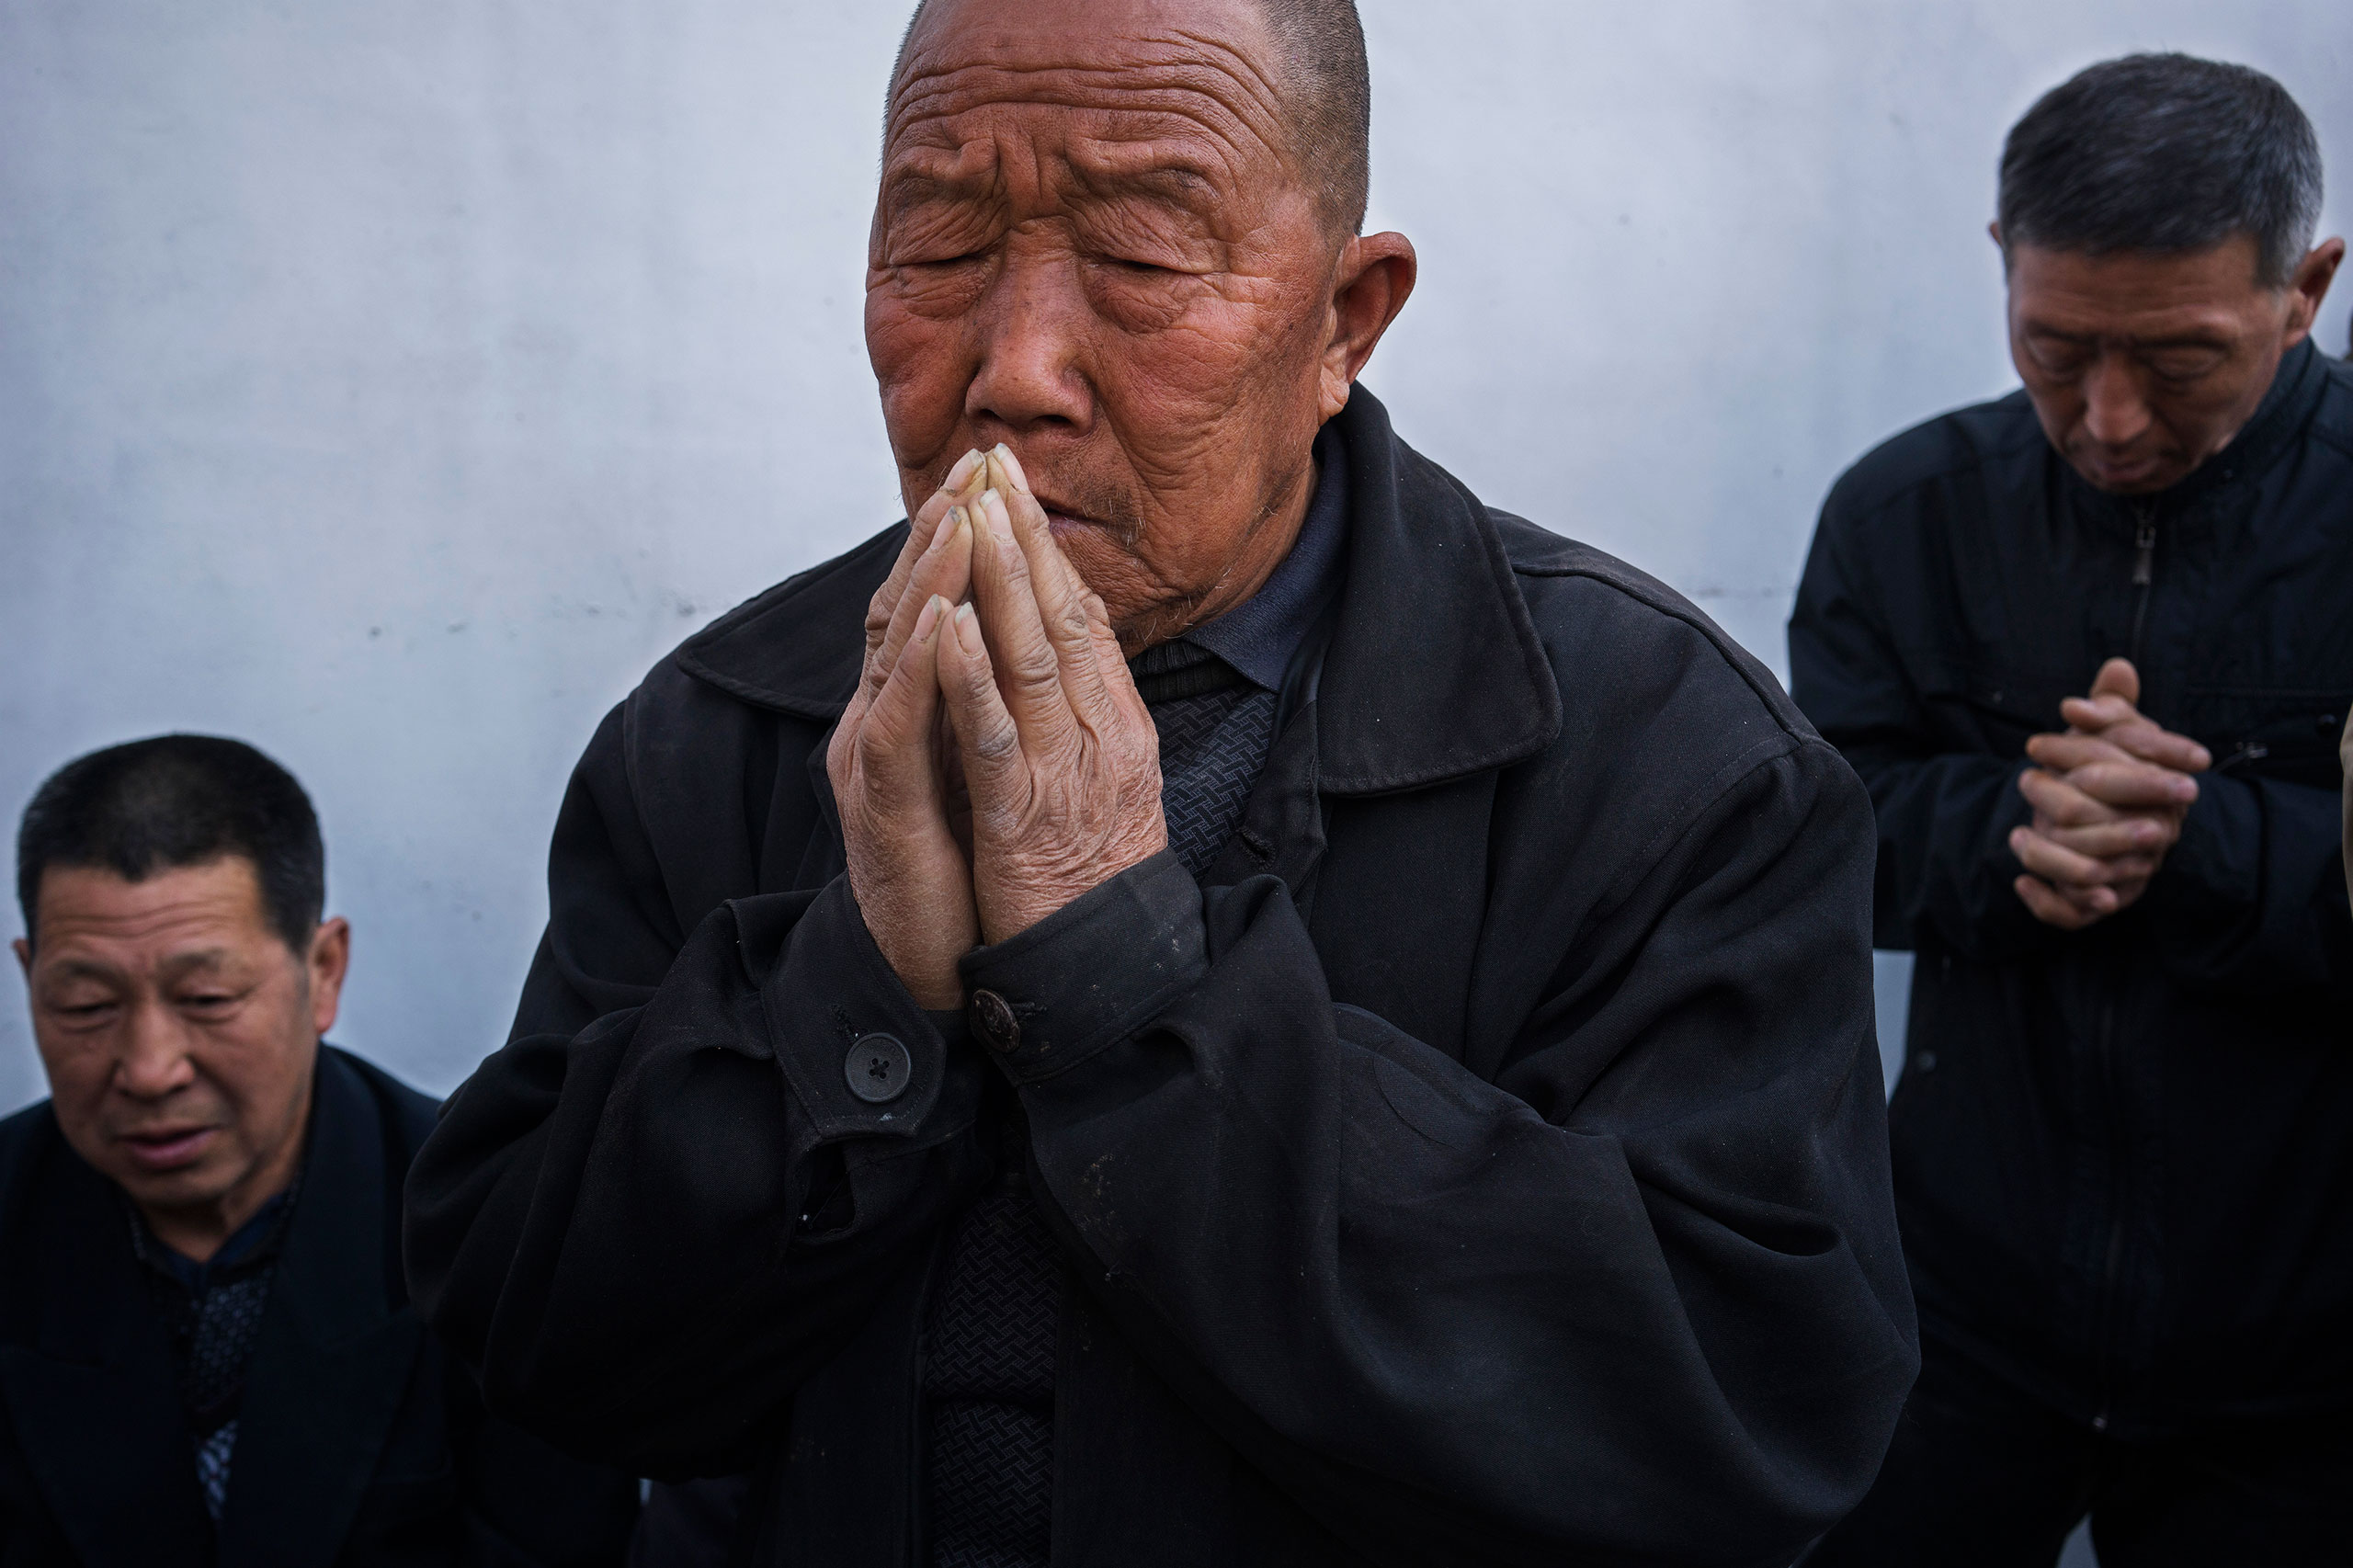 Villagers pray at an underground Easter Sunday Mass led by dissident Catholic Priest Dong Baolu in the yard of his house in Youtong village, Shijiazhuang, China, March 27, 2016.